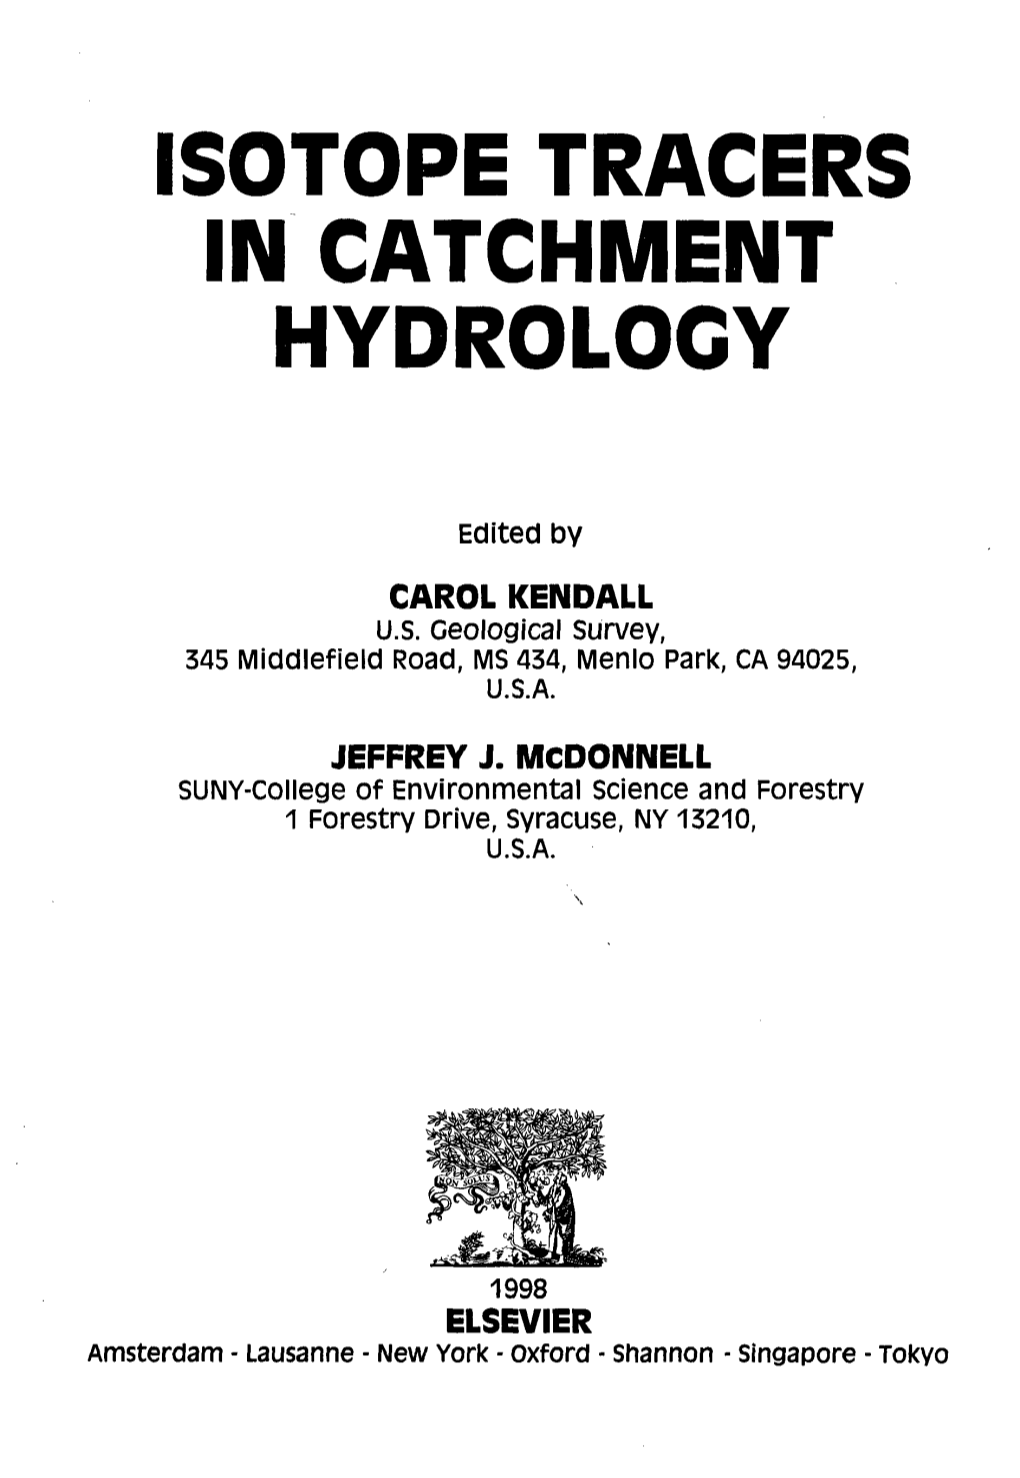 Isotope Tracers in Catchment Hydrology